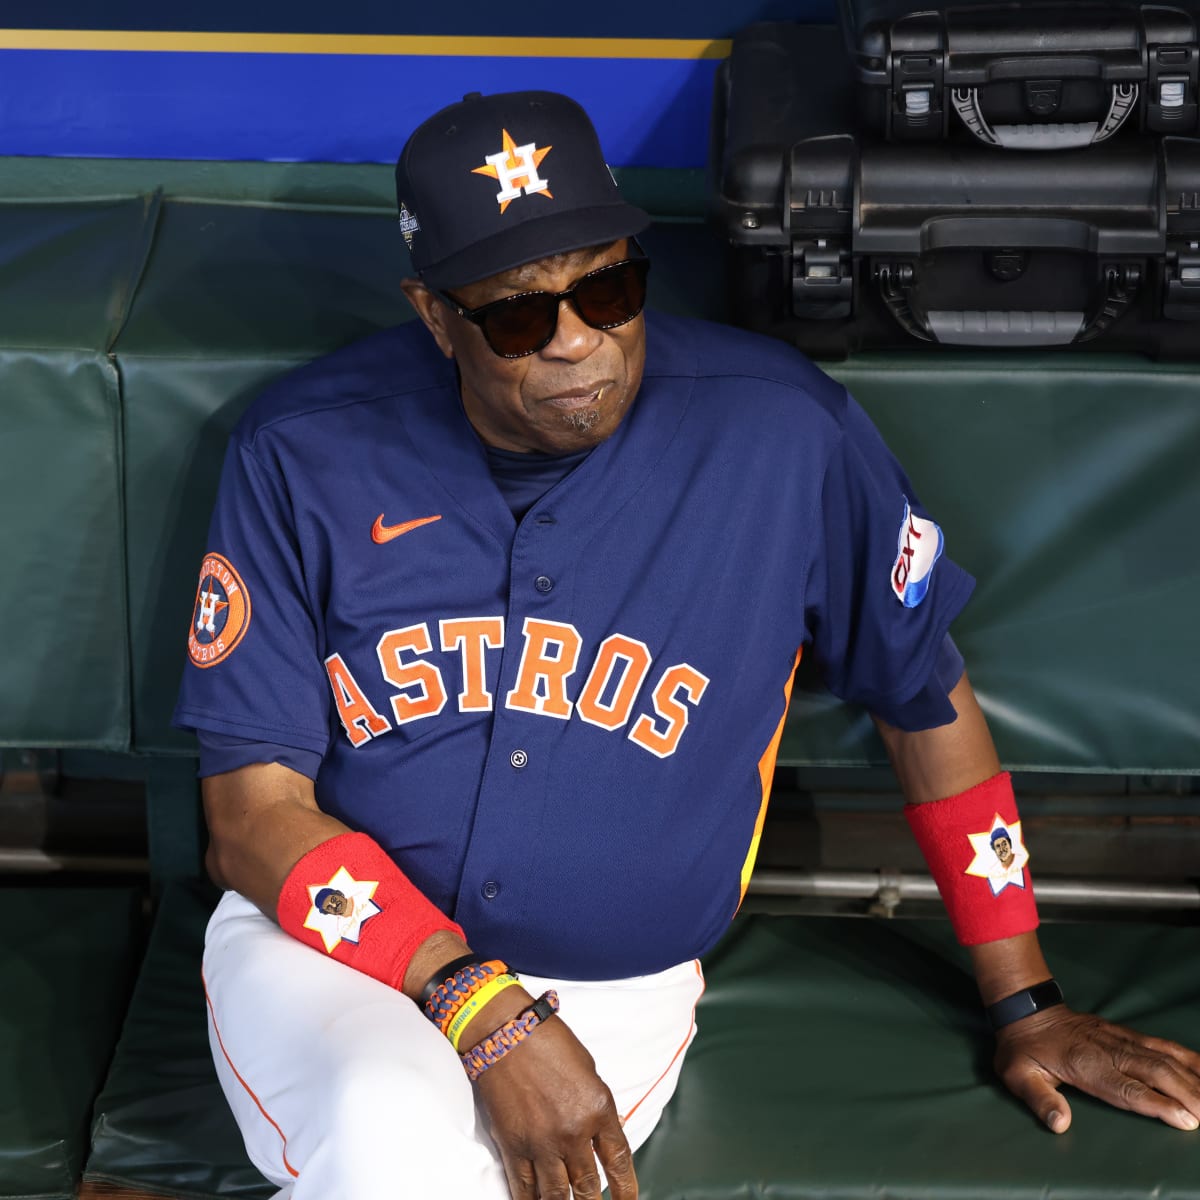 Suit yourself: Dusty Baker buys new threads for All-Star coaches - Newsday